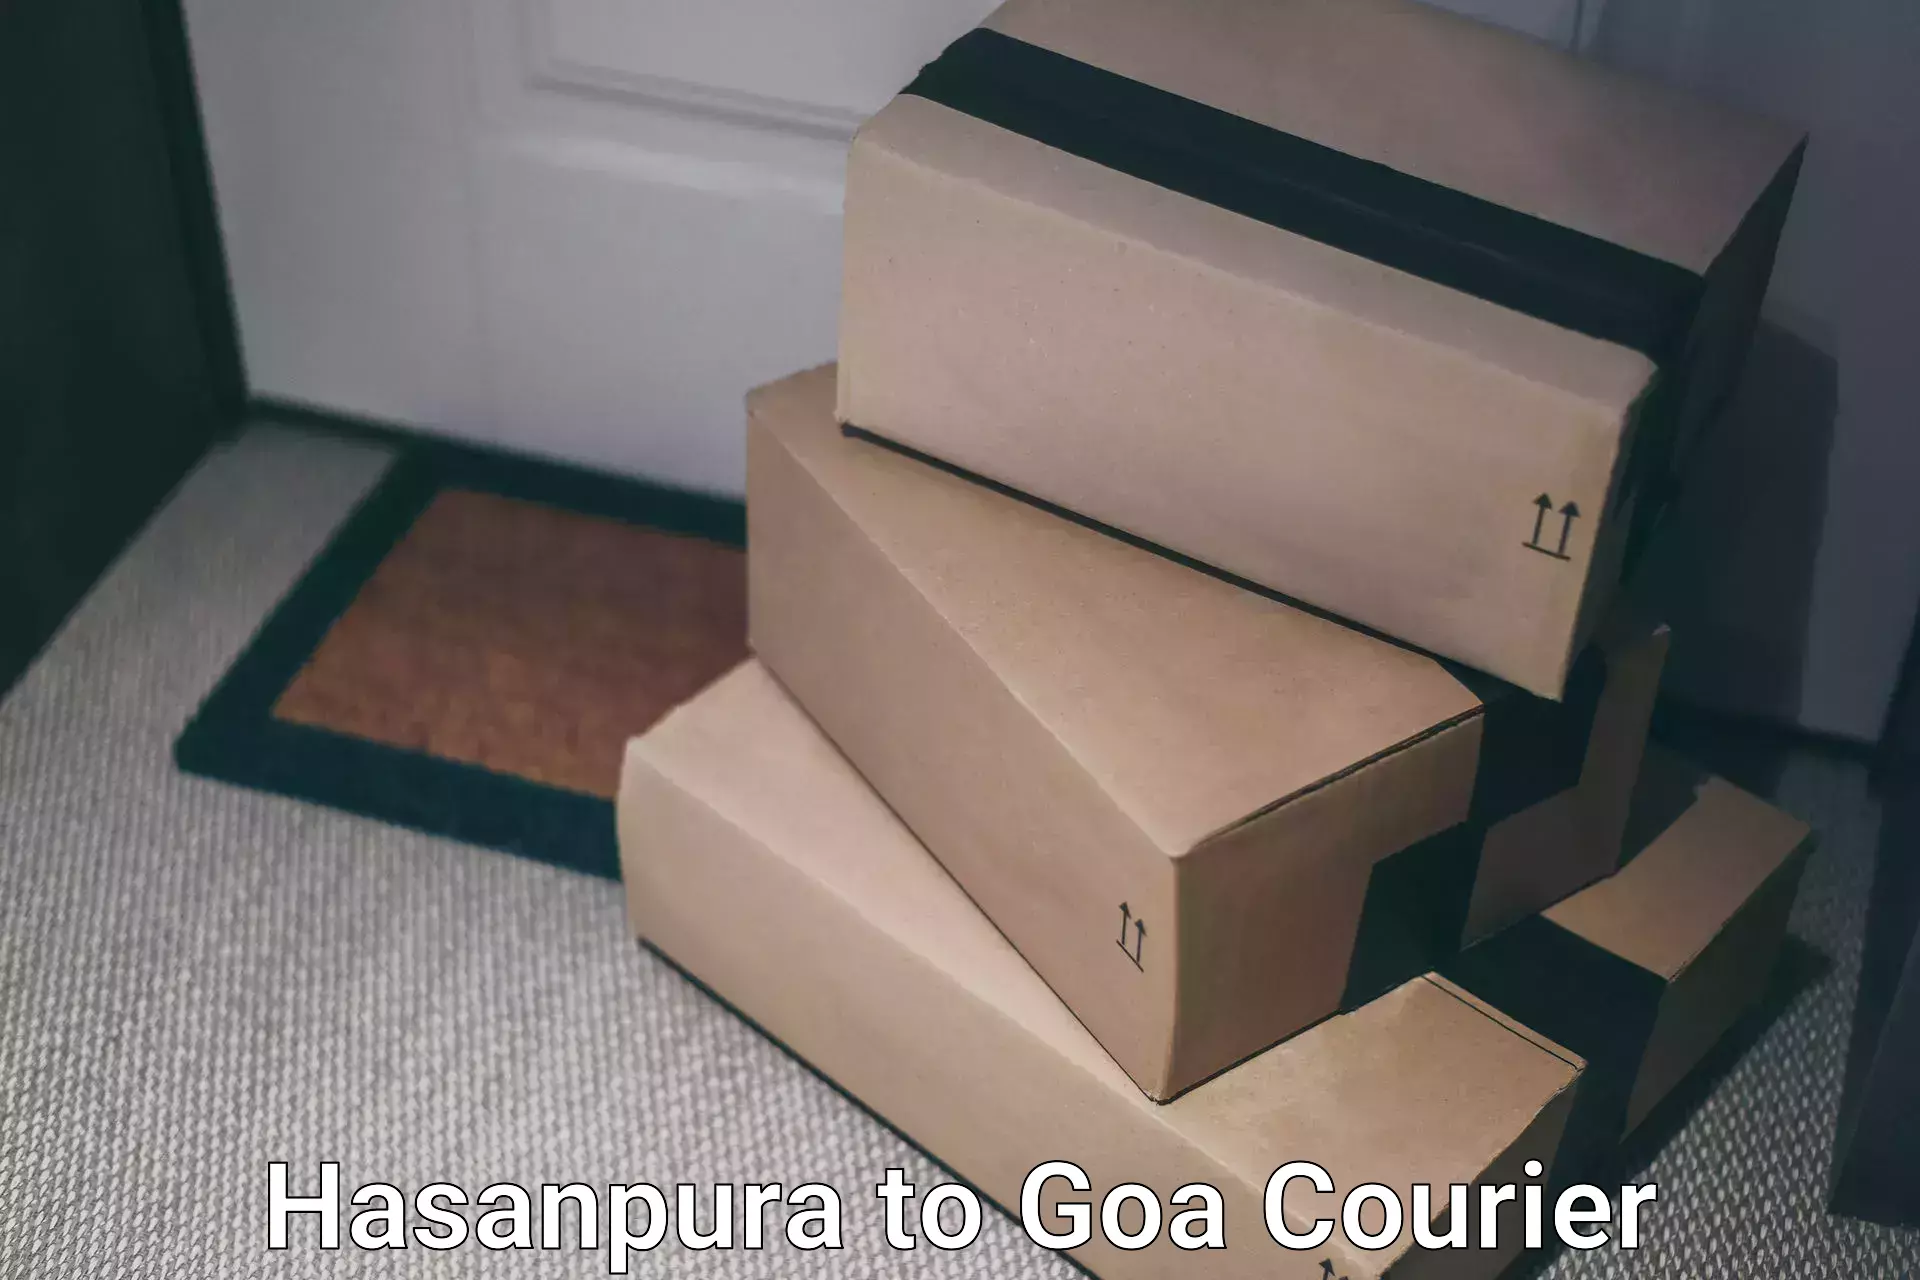 Reliable courier services in Hasanpura to Panaji